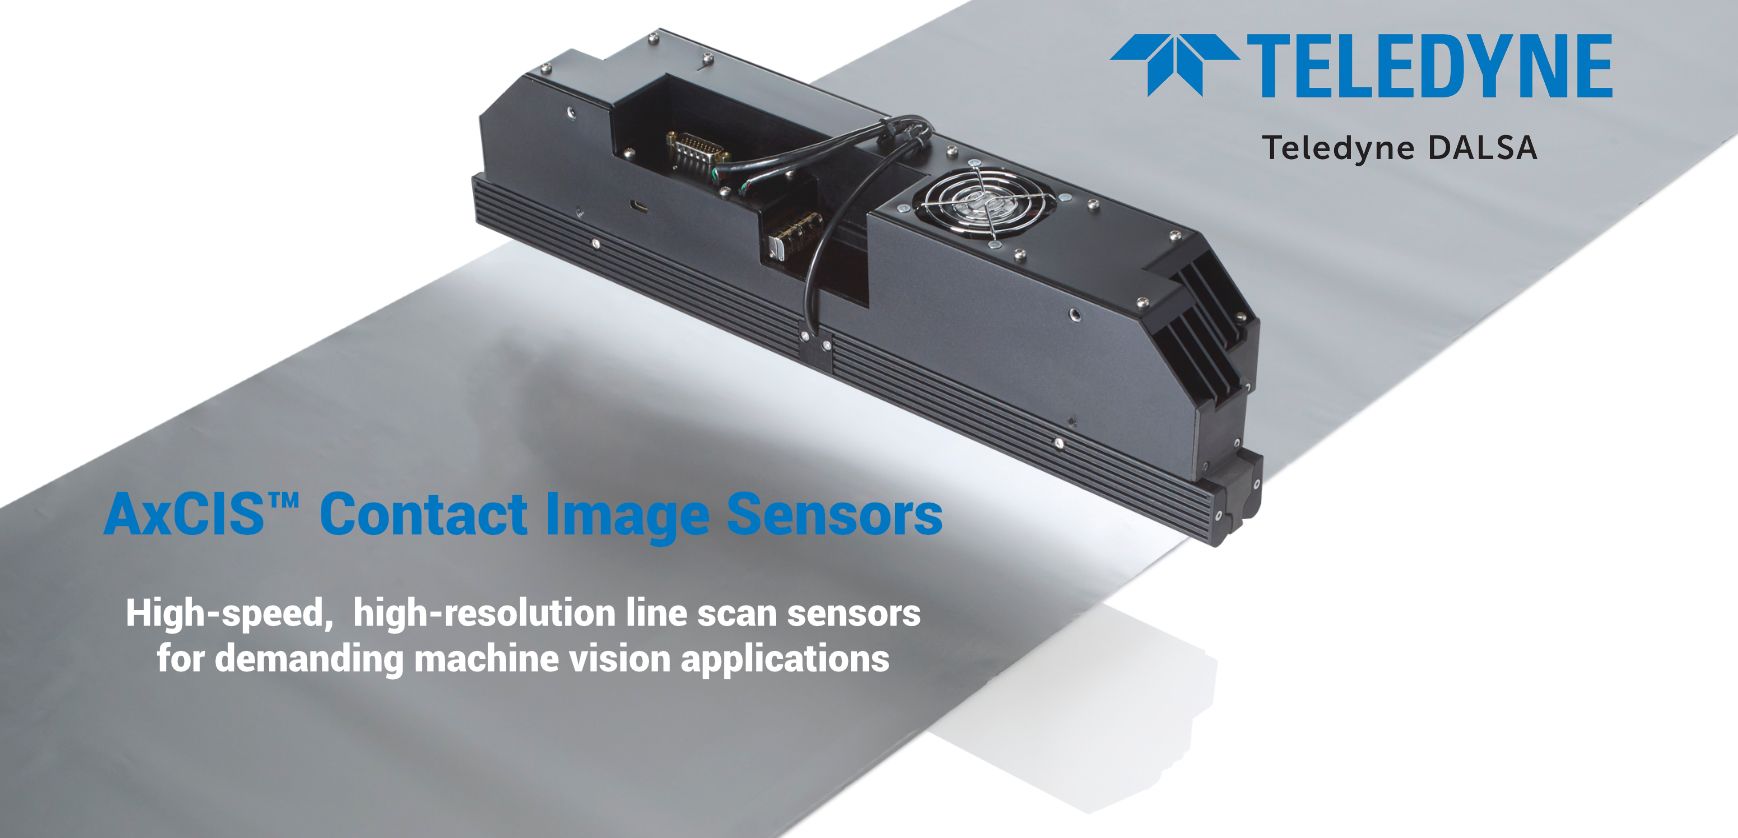 AxCIS contact image sensor from Teledyne Dalsa